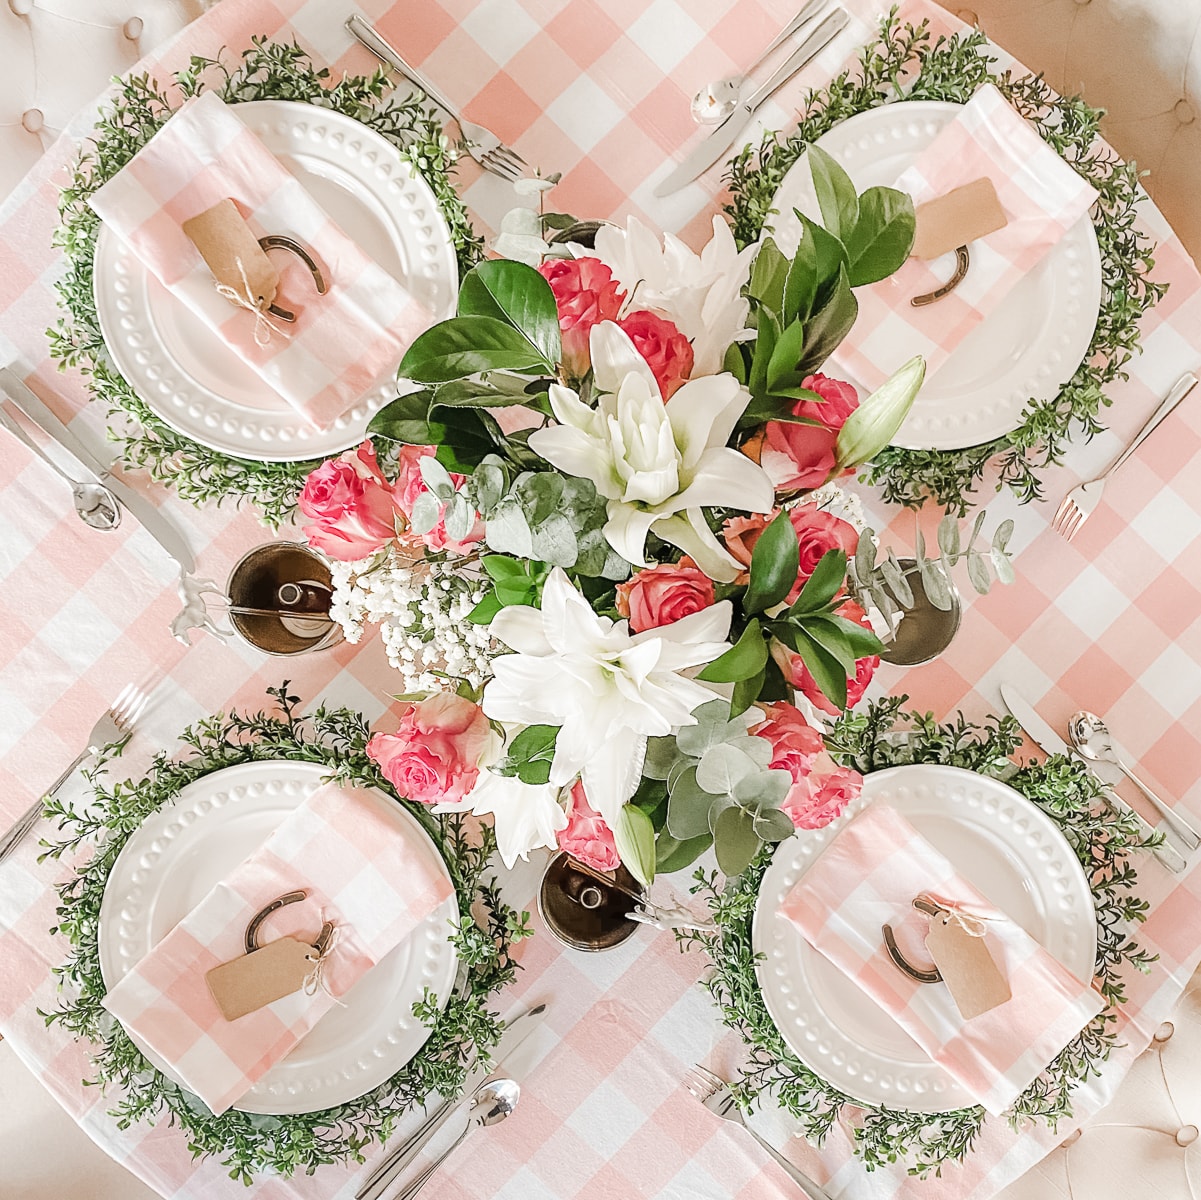 Kentucky Derby party tablescape designed by entertaining blogger Stephanie Ziajka on Diary of a Debutante